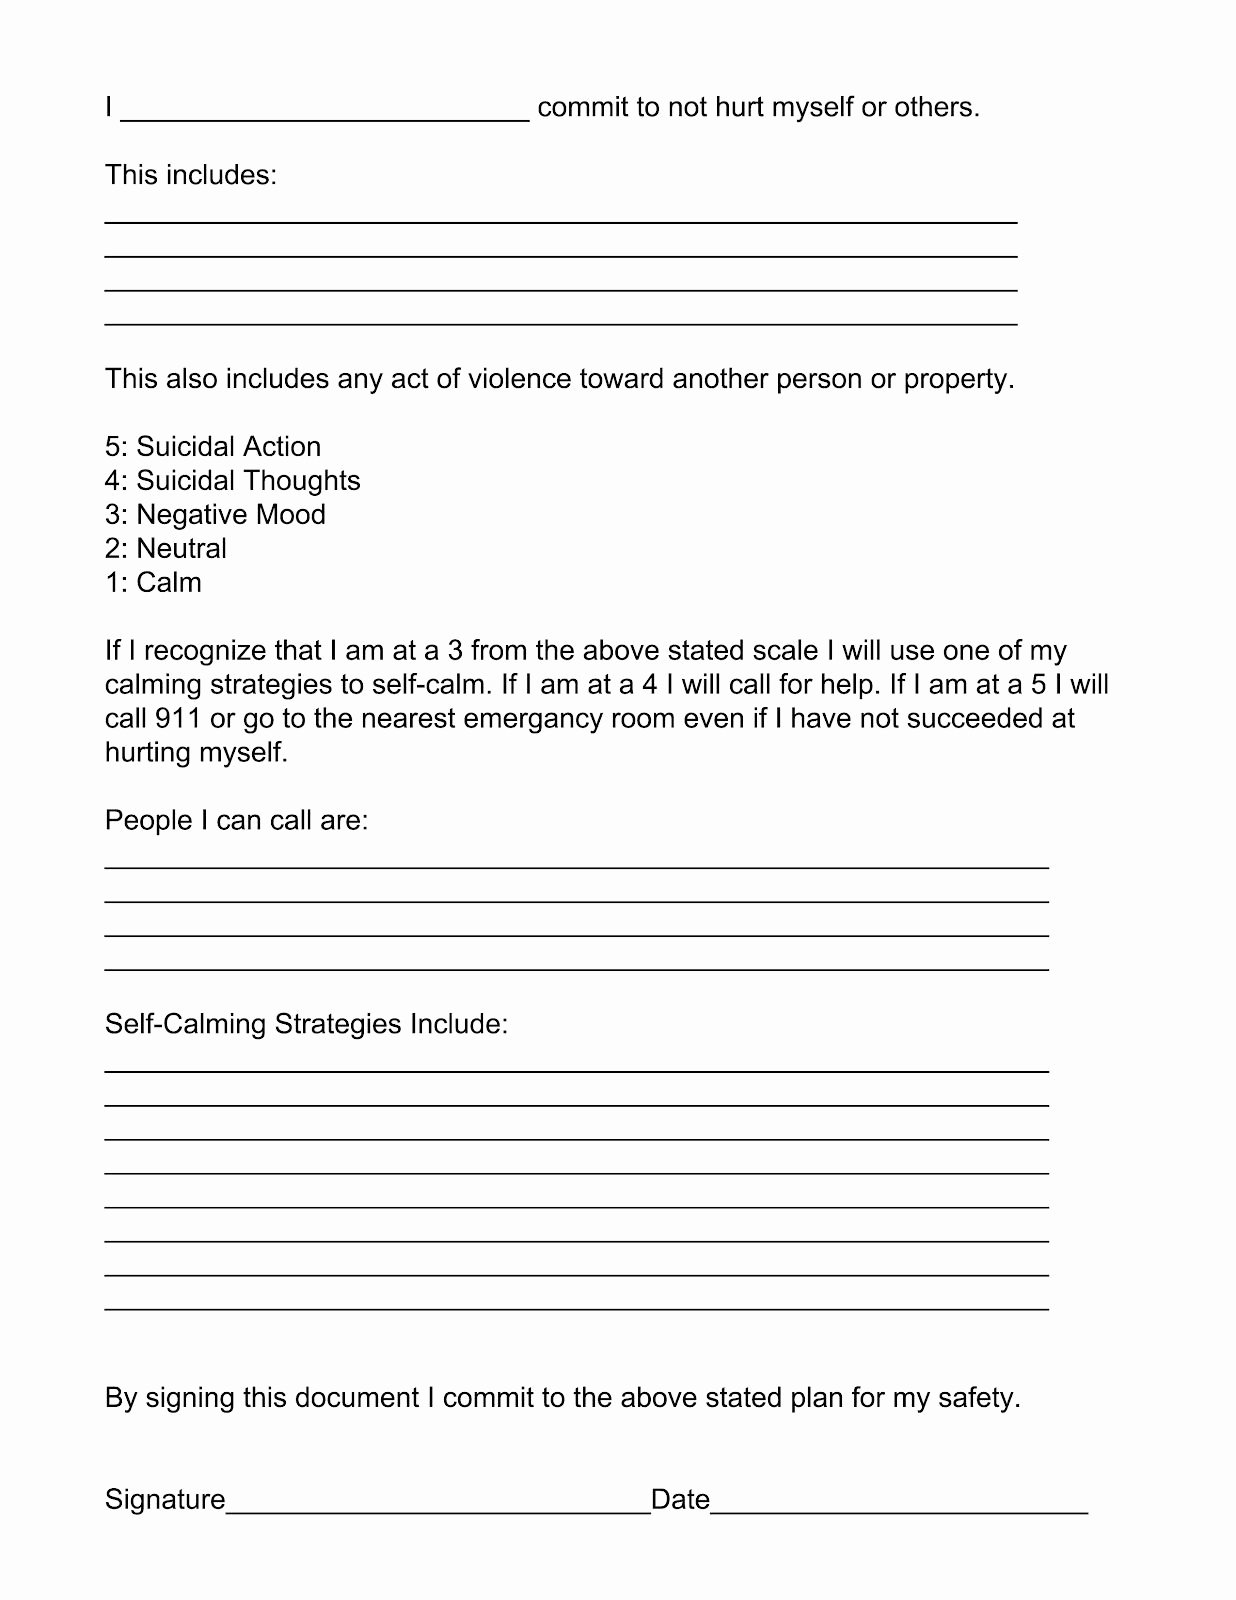 Child Safety Plan Template Awesome Safety Plan for Suicidal or at Risk People